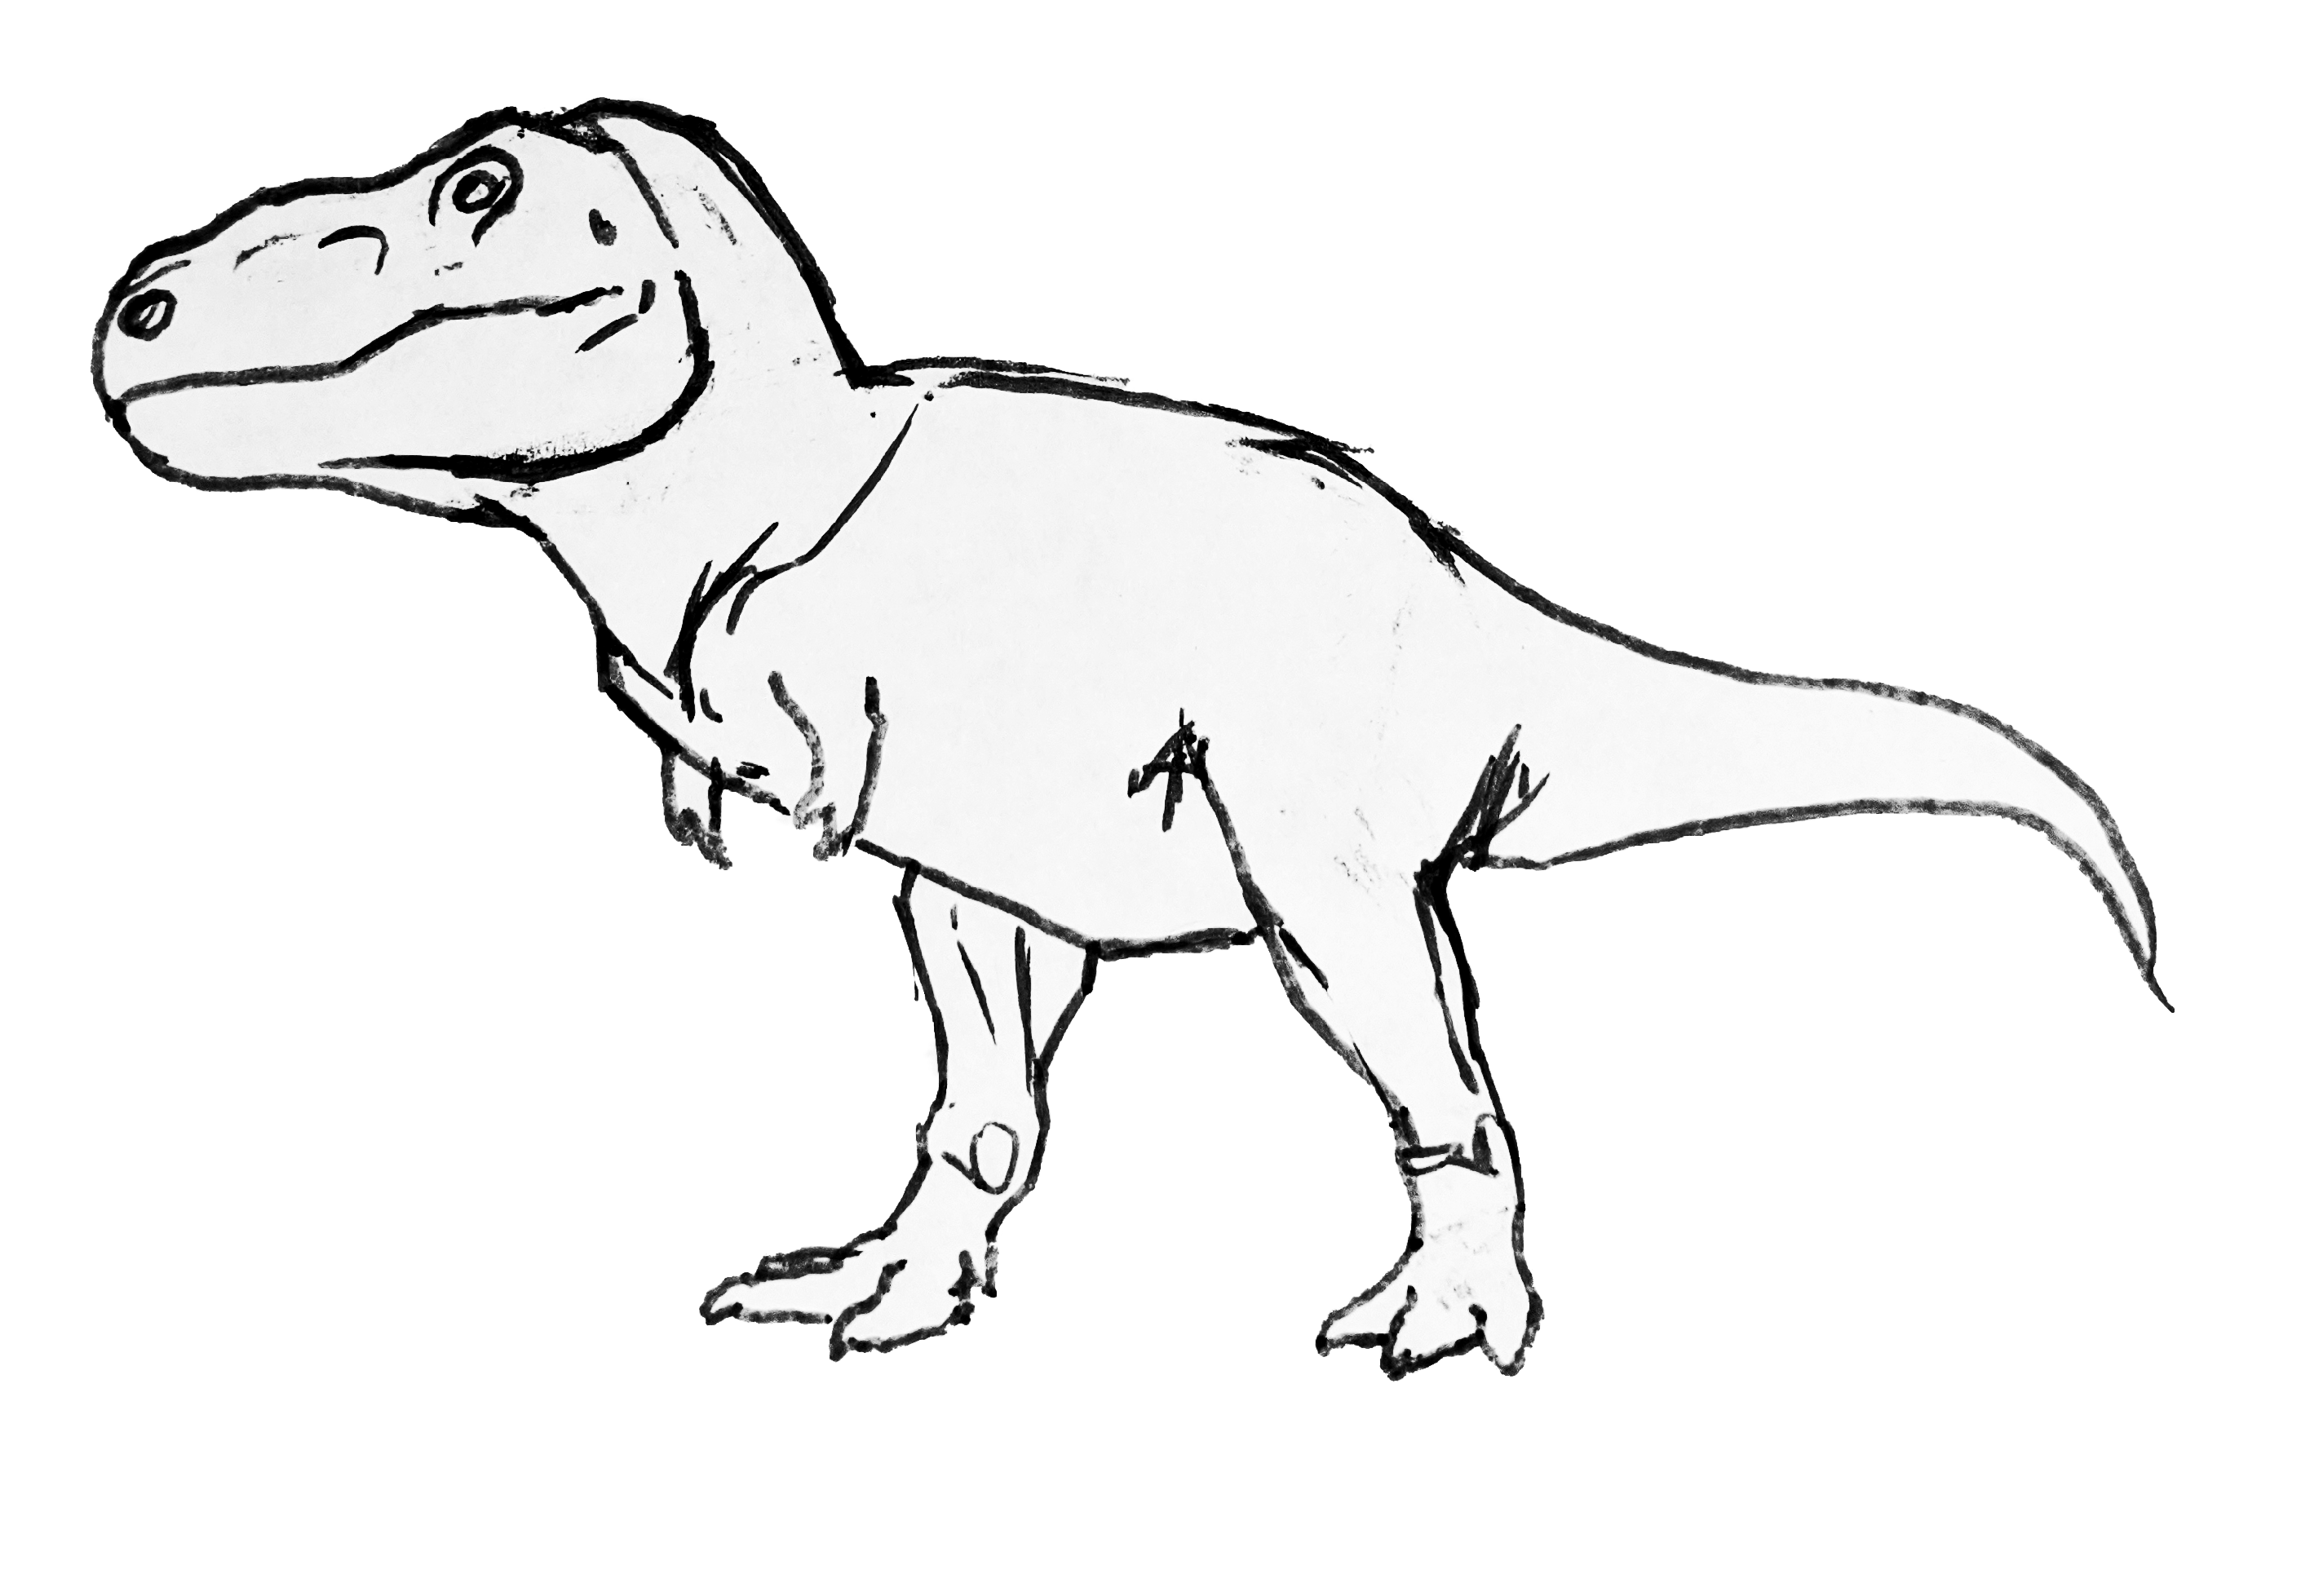 More detailed drawing of a T. rex dinosaur